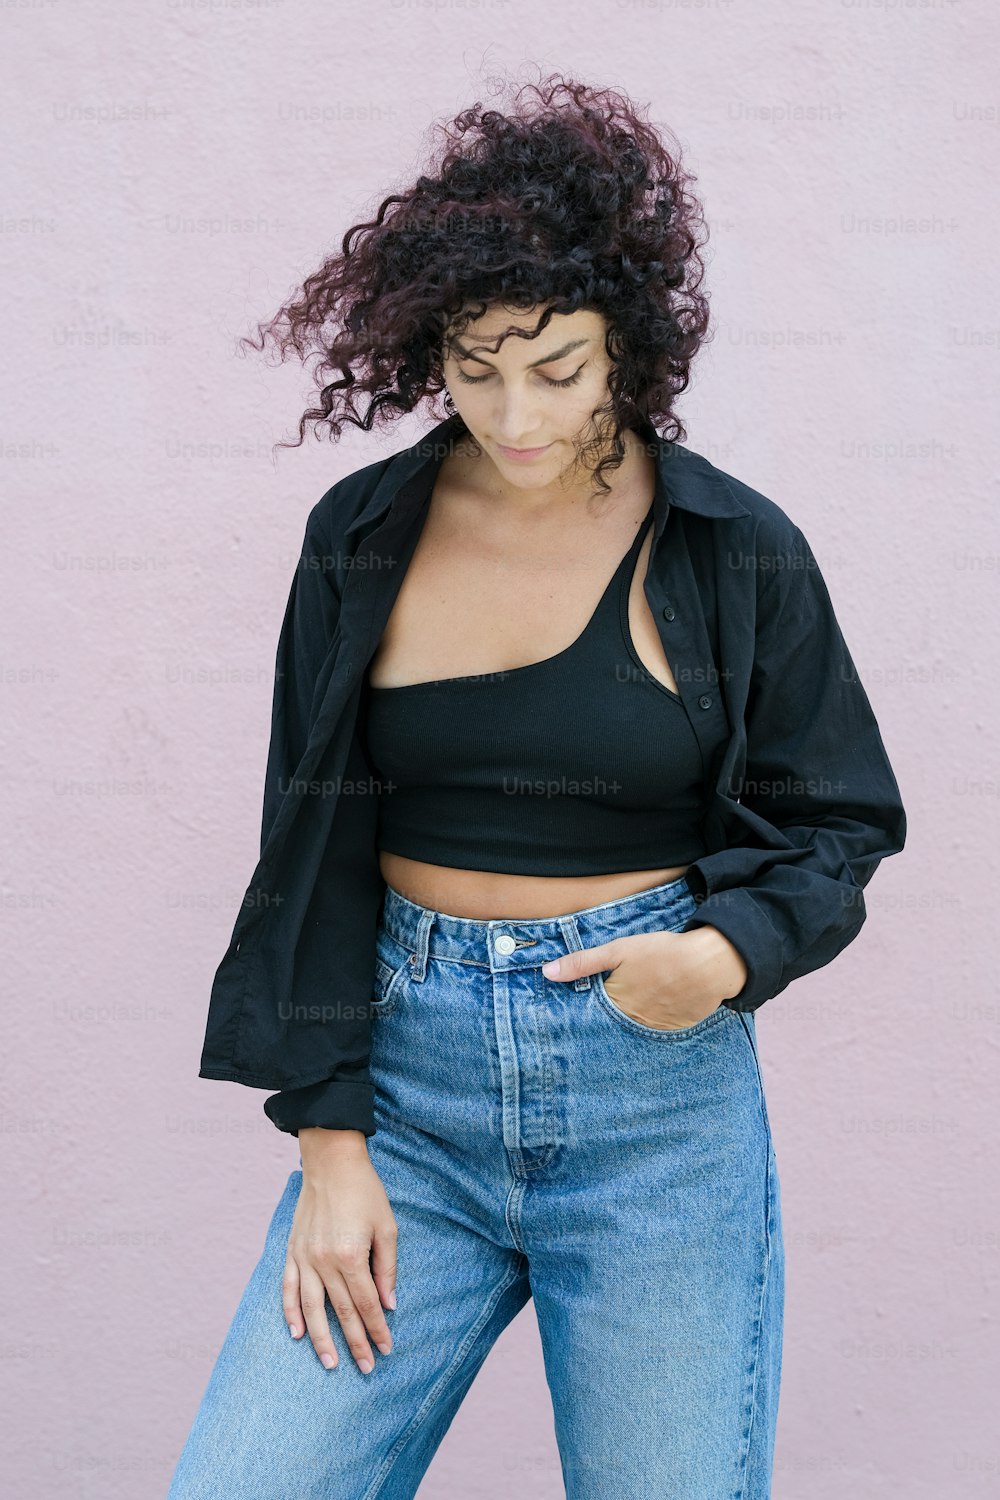 a woman with curly hair wearing jeans and a crop top